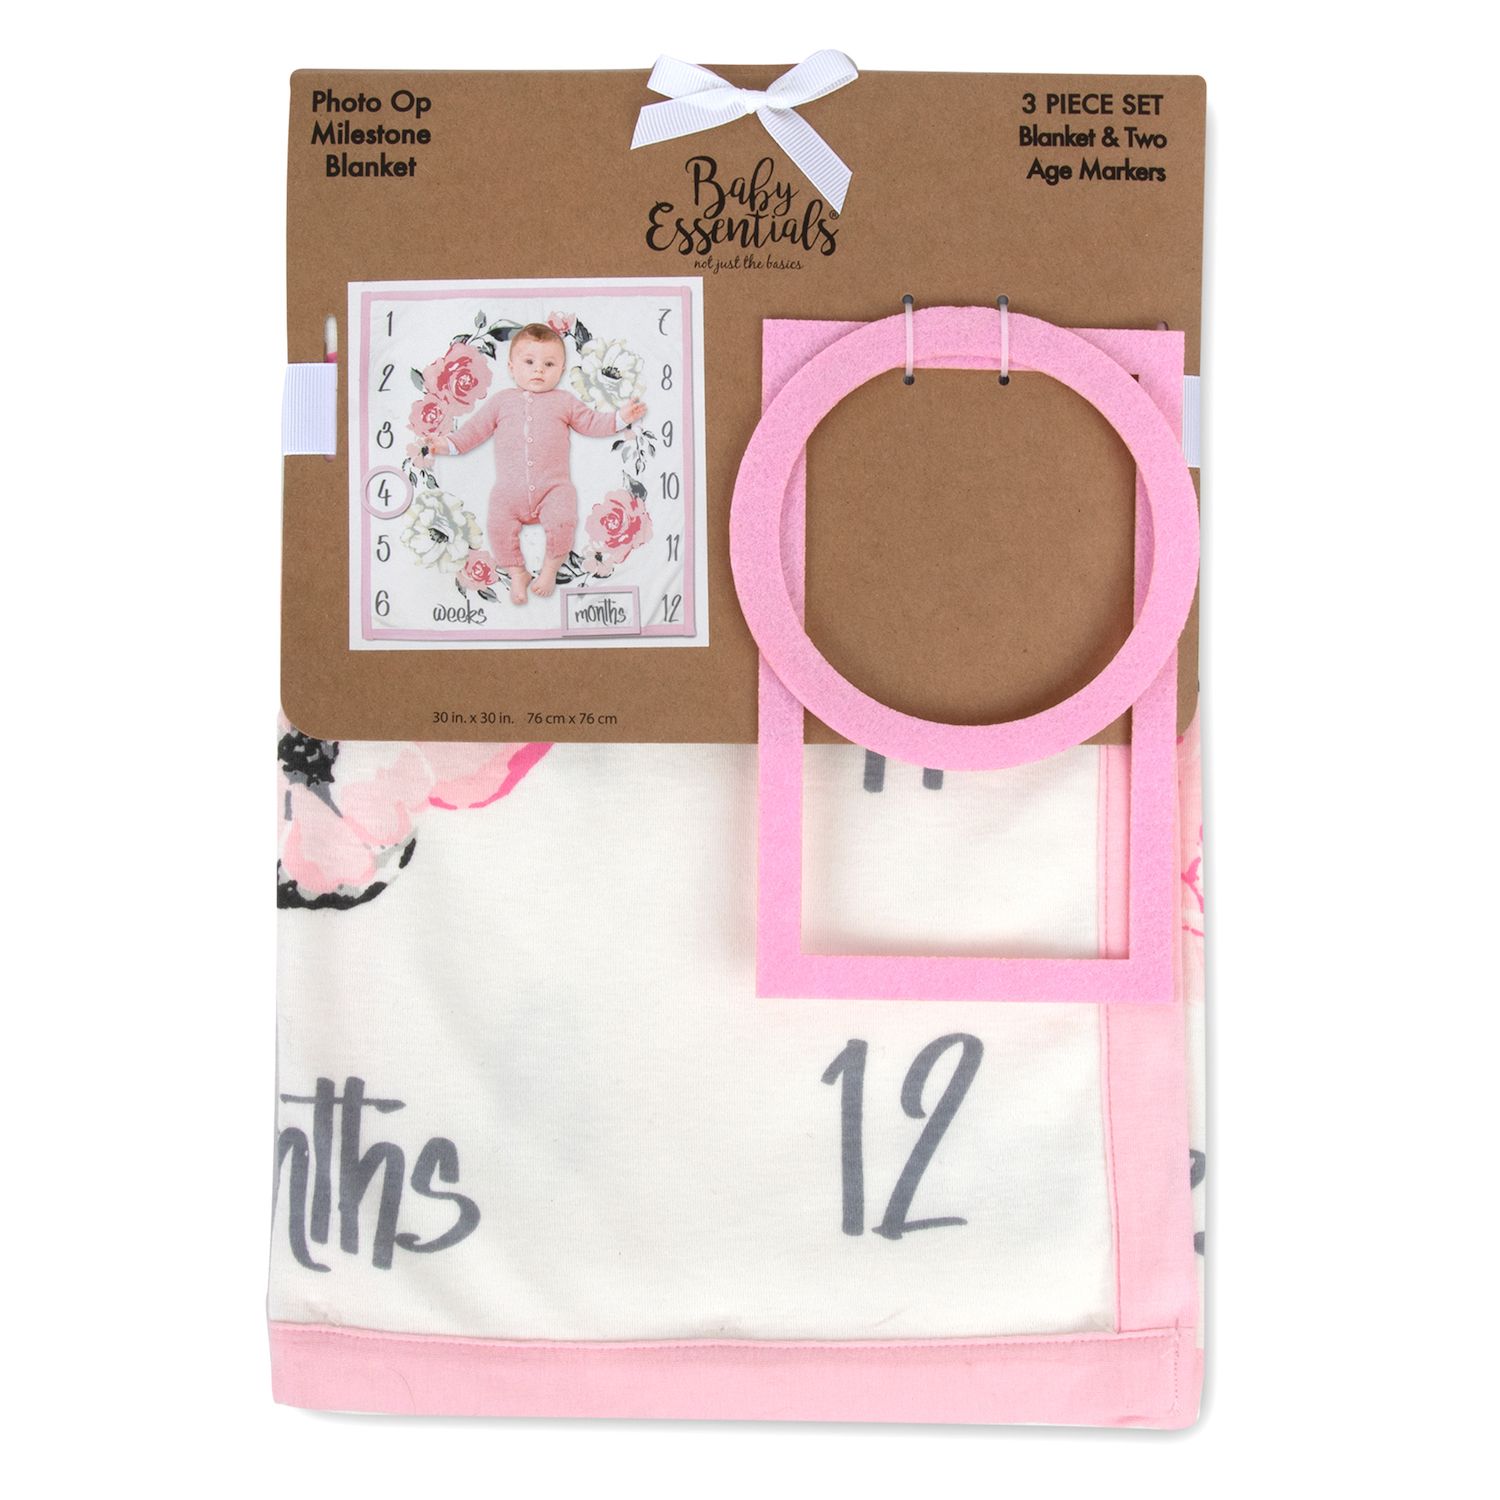 Keababies Sketch Baby Memory Book, Baby Books For New Parents